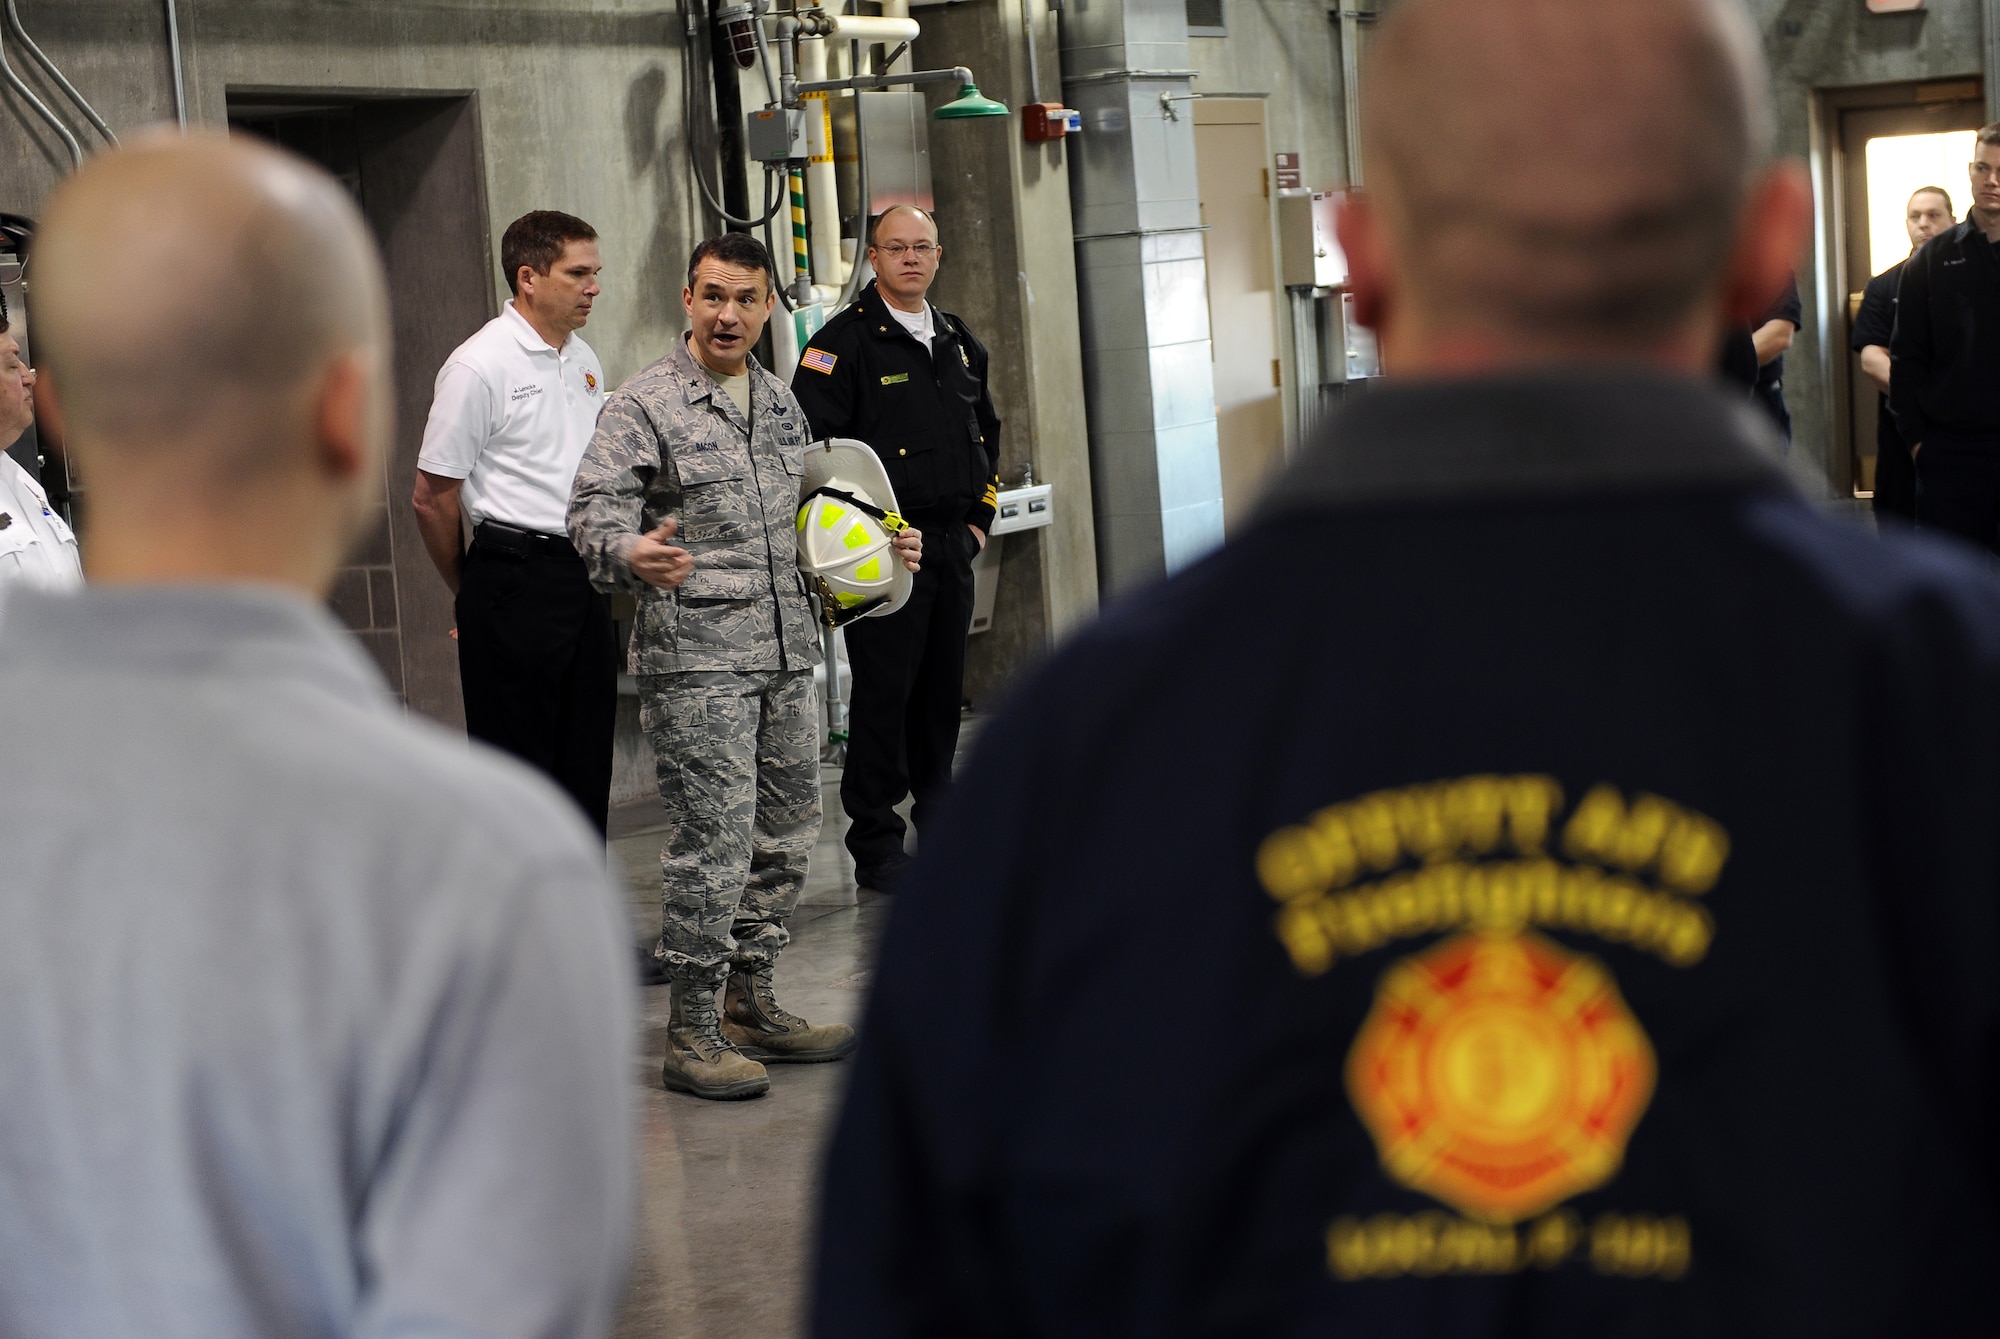 U.S. Air Force Brig. Gen. Donald Bacon, 55th Wing commander, addresses the fire fighters during their morning roll call following a 24-hour shift with them at the firehouse on Offutt Air Force Base,  Neb., March 8.  Bacon spent a 24-hour period with Offutt firefighters to get an up-close look into their operations and life in the firehouse.  (U.S. Air Force photo by Josh Plueger/Released).